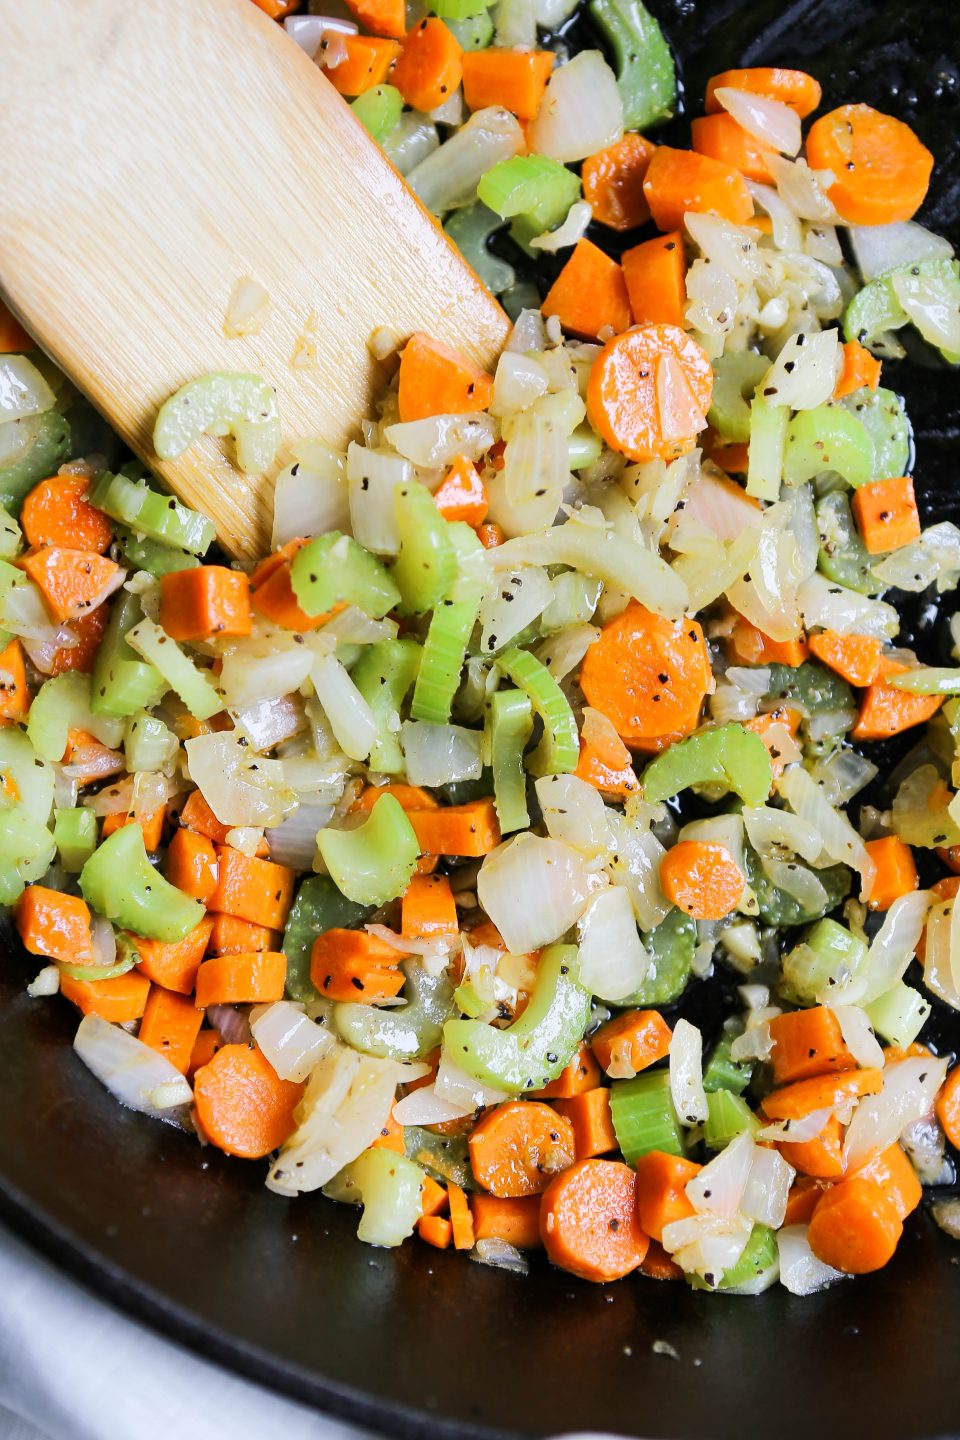 An image of mirepoix which is onions, carrots, and celery sautéed together making the base of a soup or stew. 